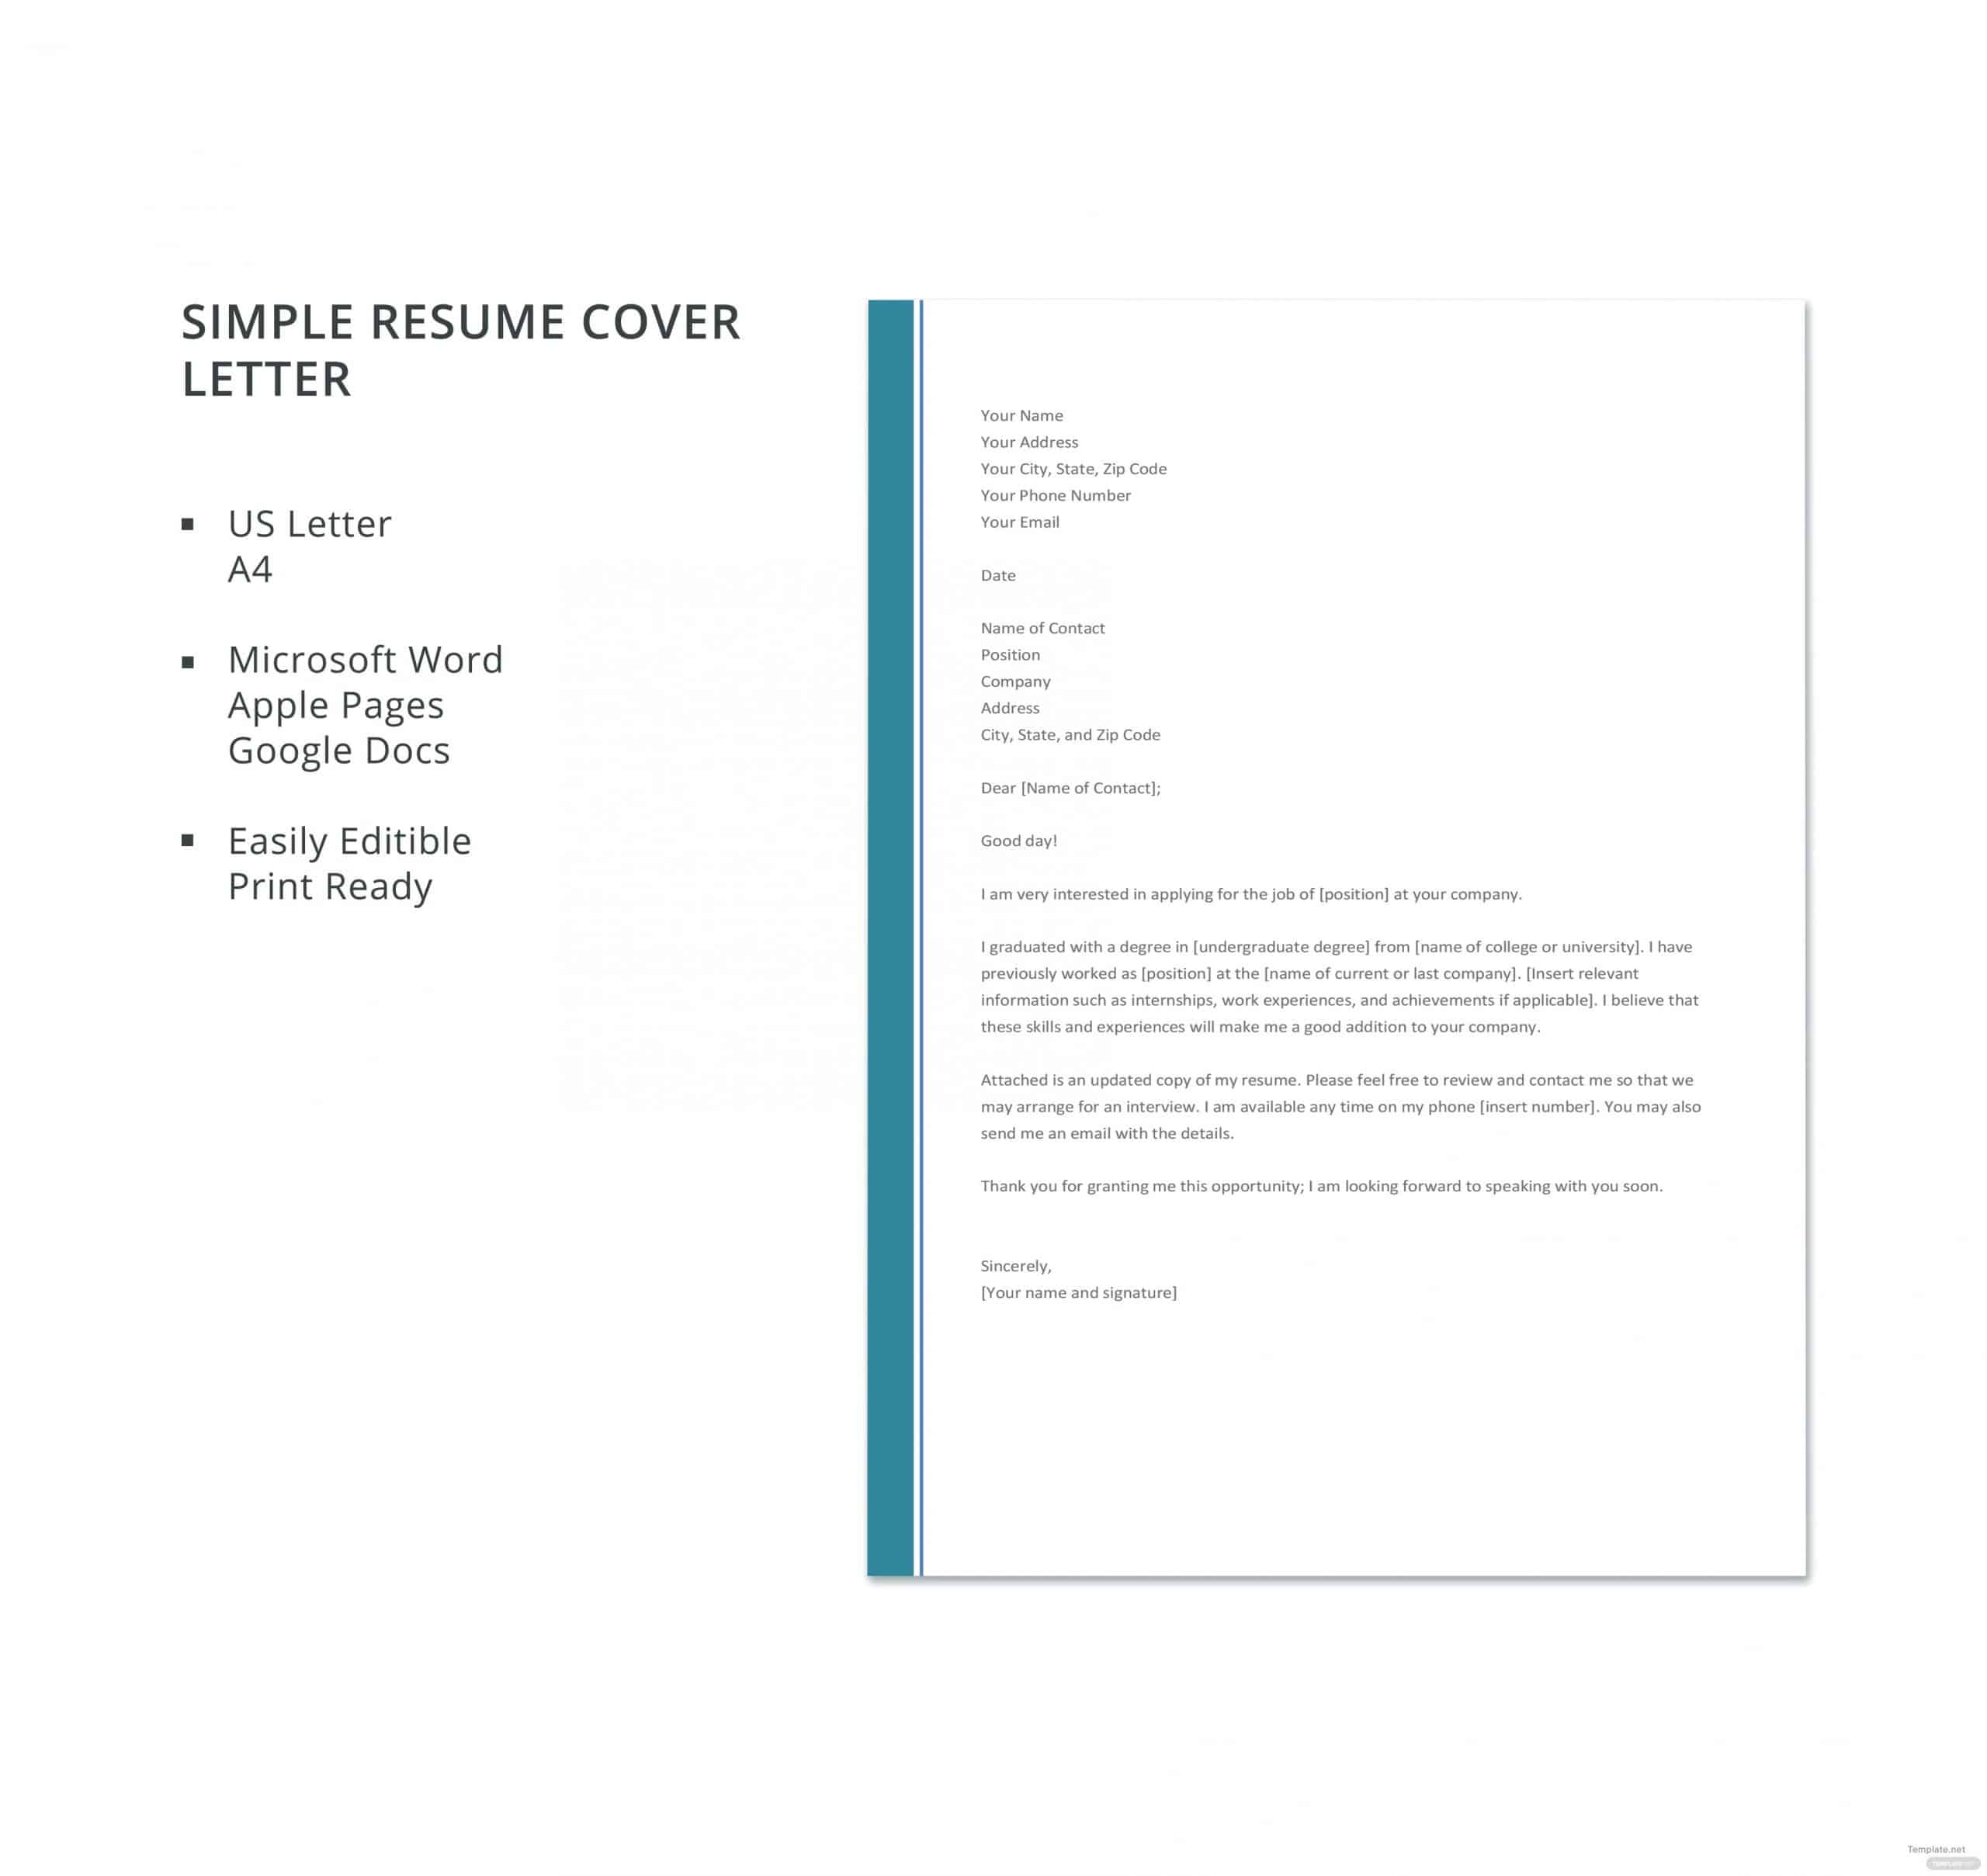 Free Simple Resume Cover Letter Template in Microsoft Word, Apple Pages ...